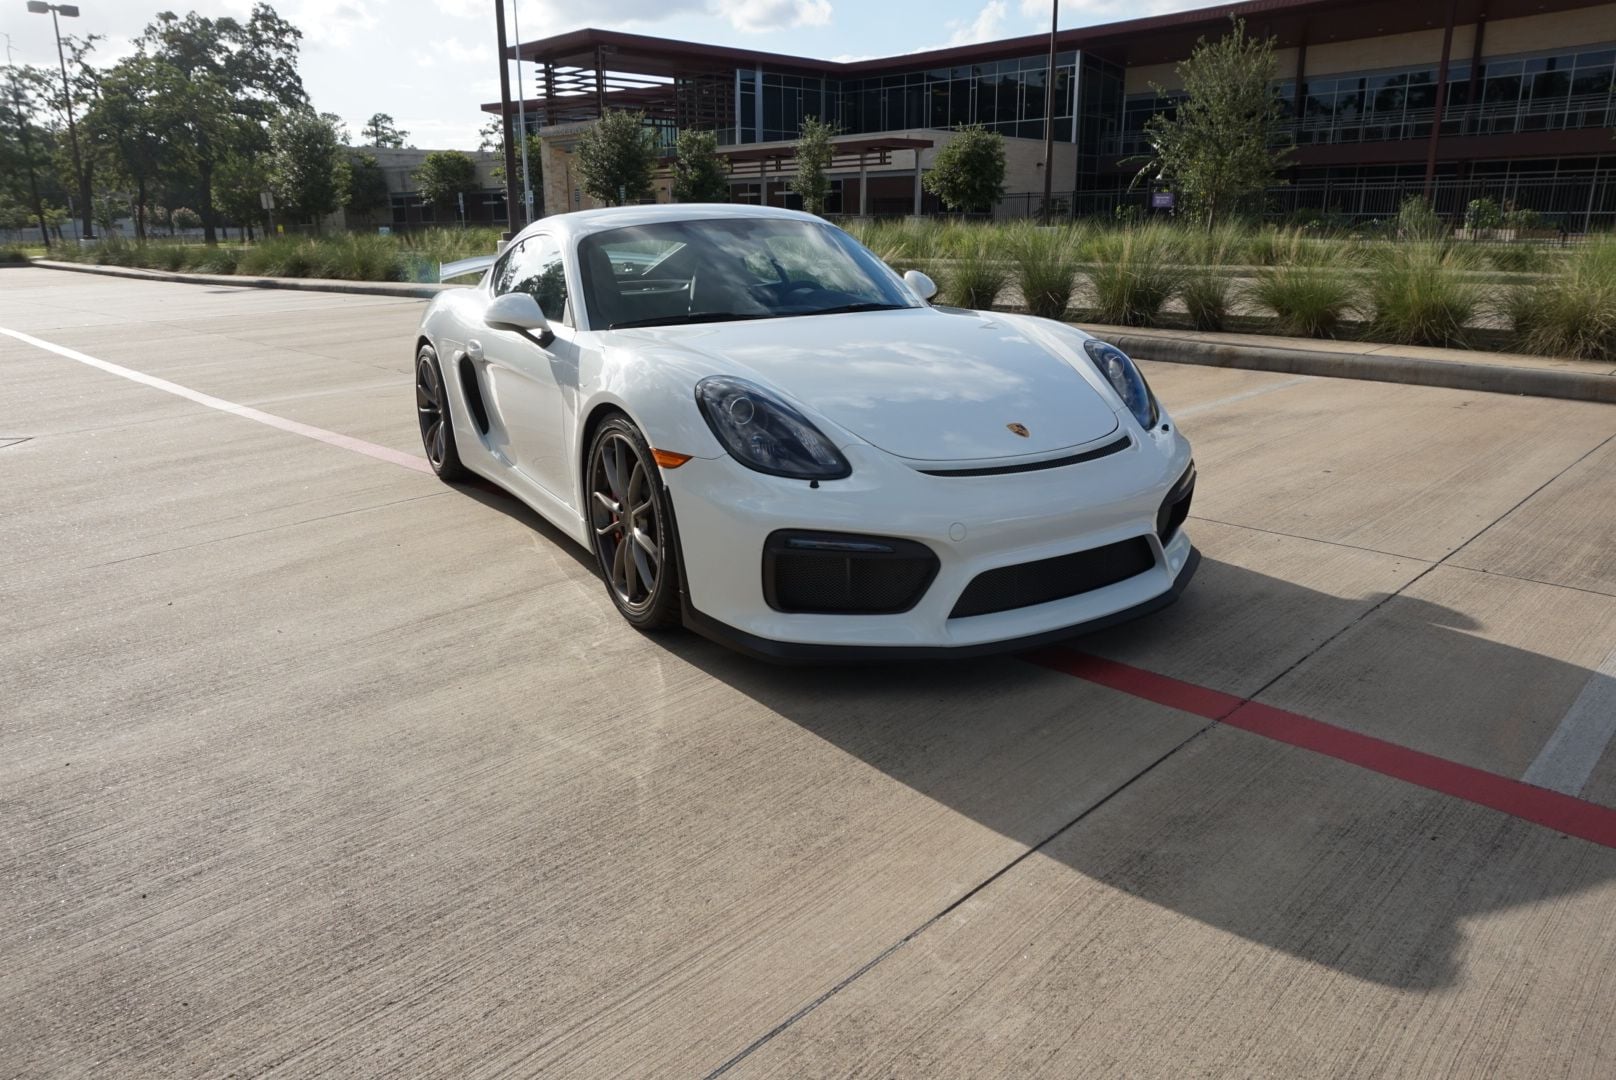 2016 Porsche Cayman GT4 - 2016 Cayman GT4, white, low mileage, no mods, warranty, located in Houston, TX - Used - VIN WP0AC2A85GK192476 - 4,940 Miles - 6 cyl - 2WD - Manual - Coupe - White - Houston, TX 77024, United States